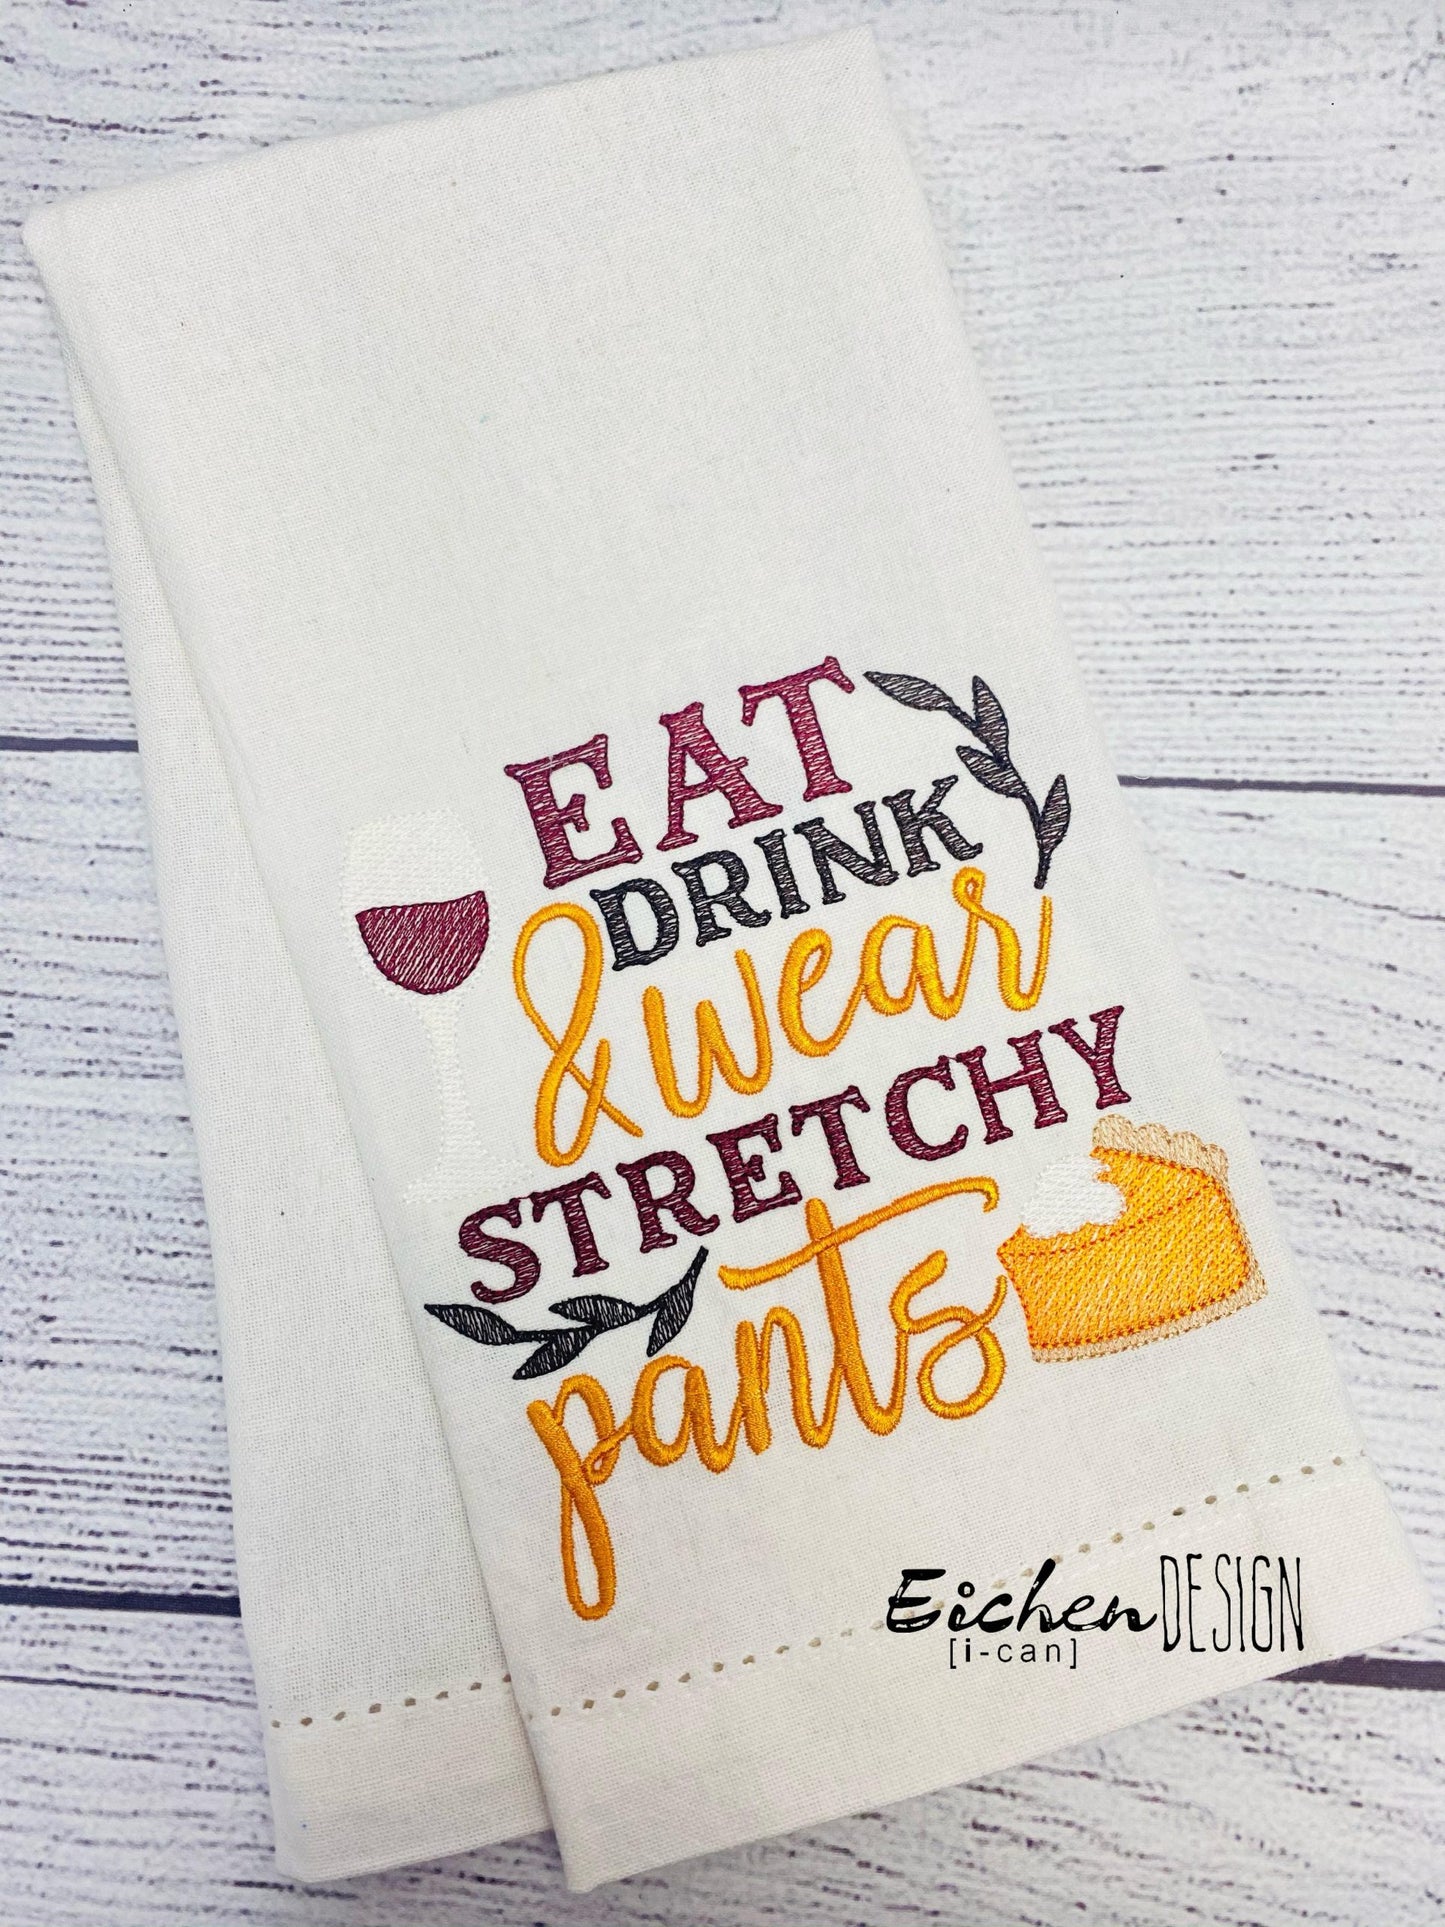 Eat Drink and Wear Stretchy Pants - 2 Sizes - Digital Embroidery Design